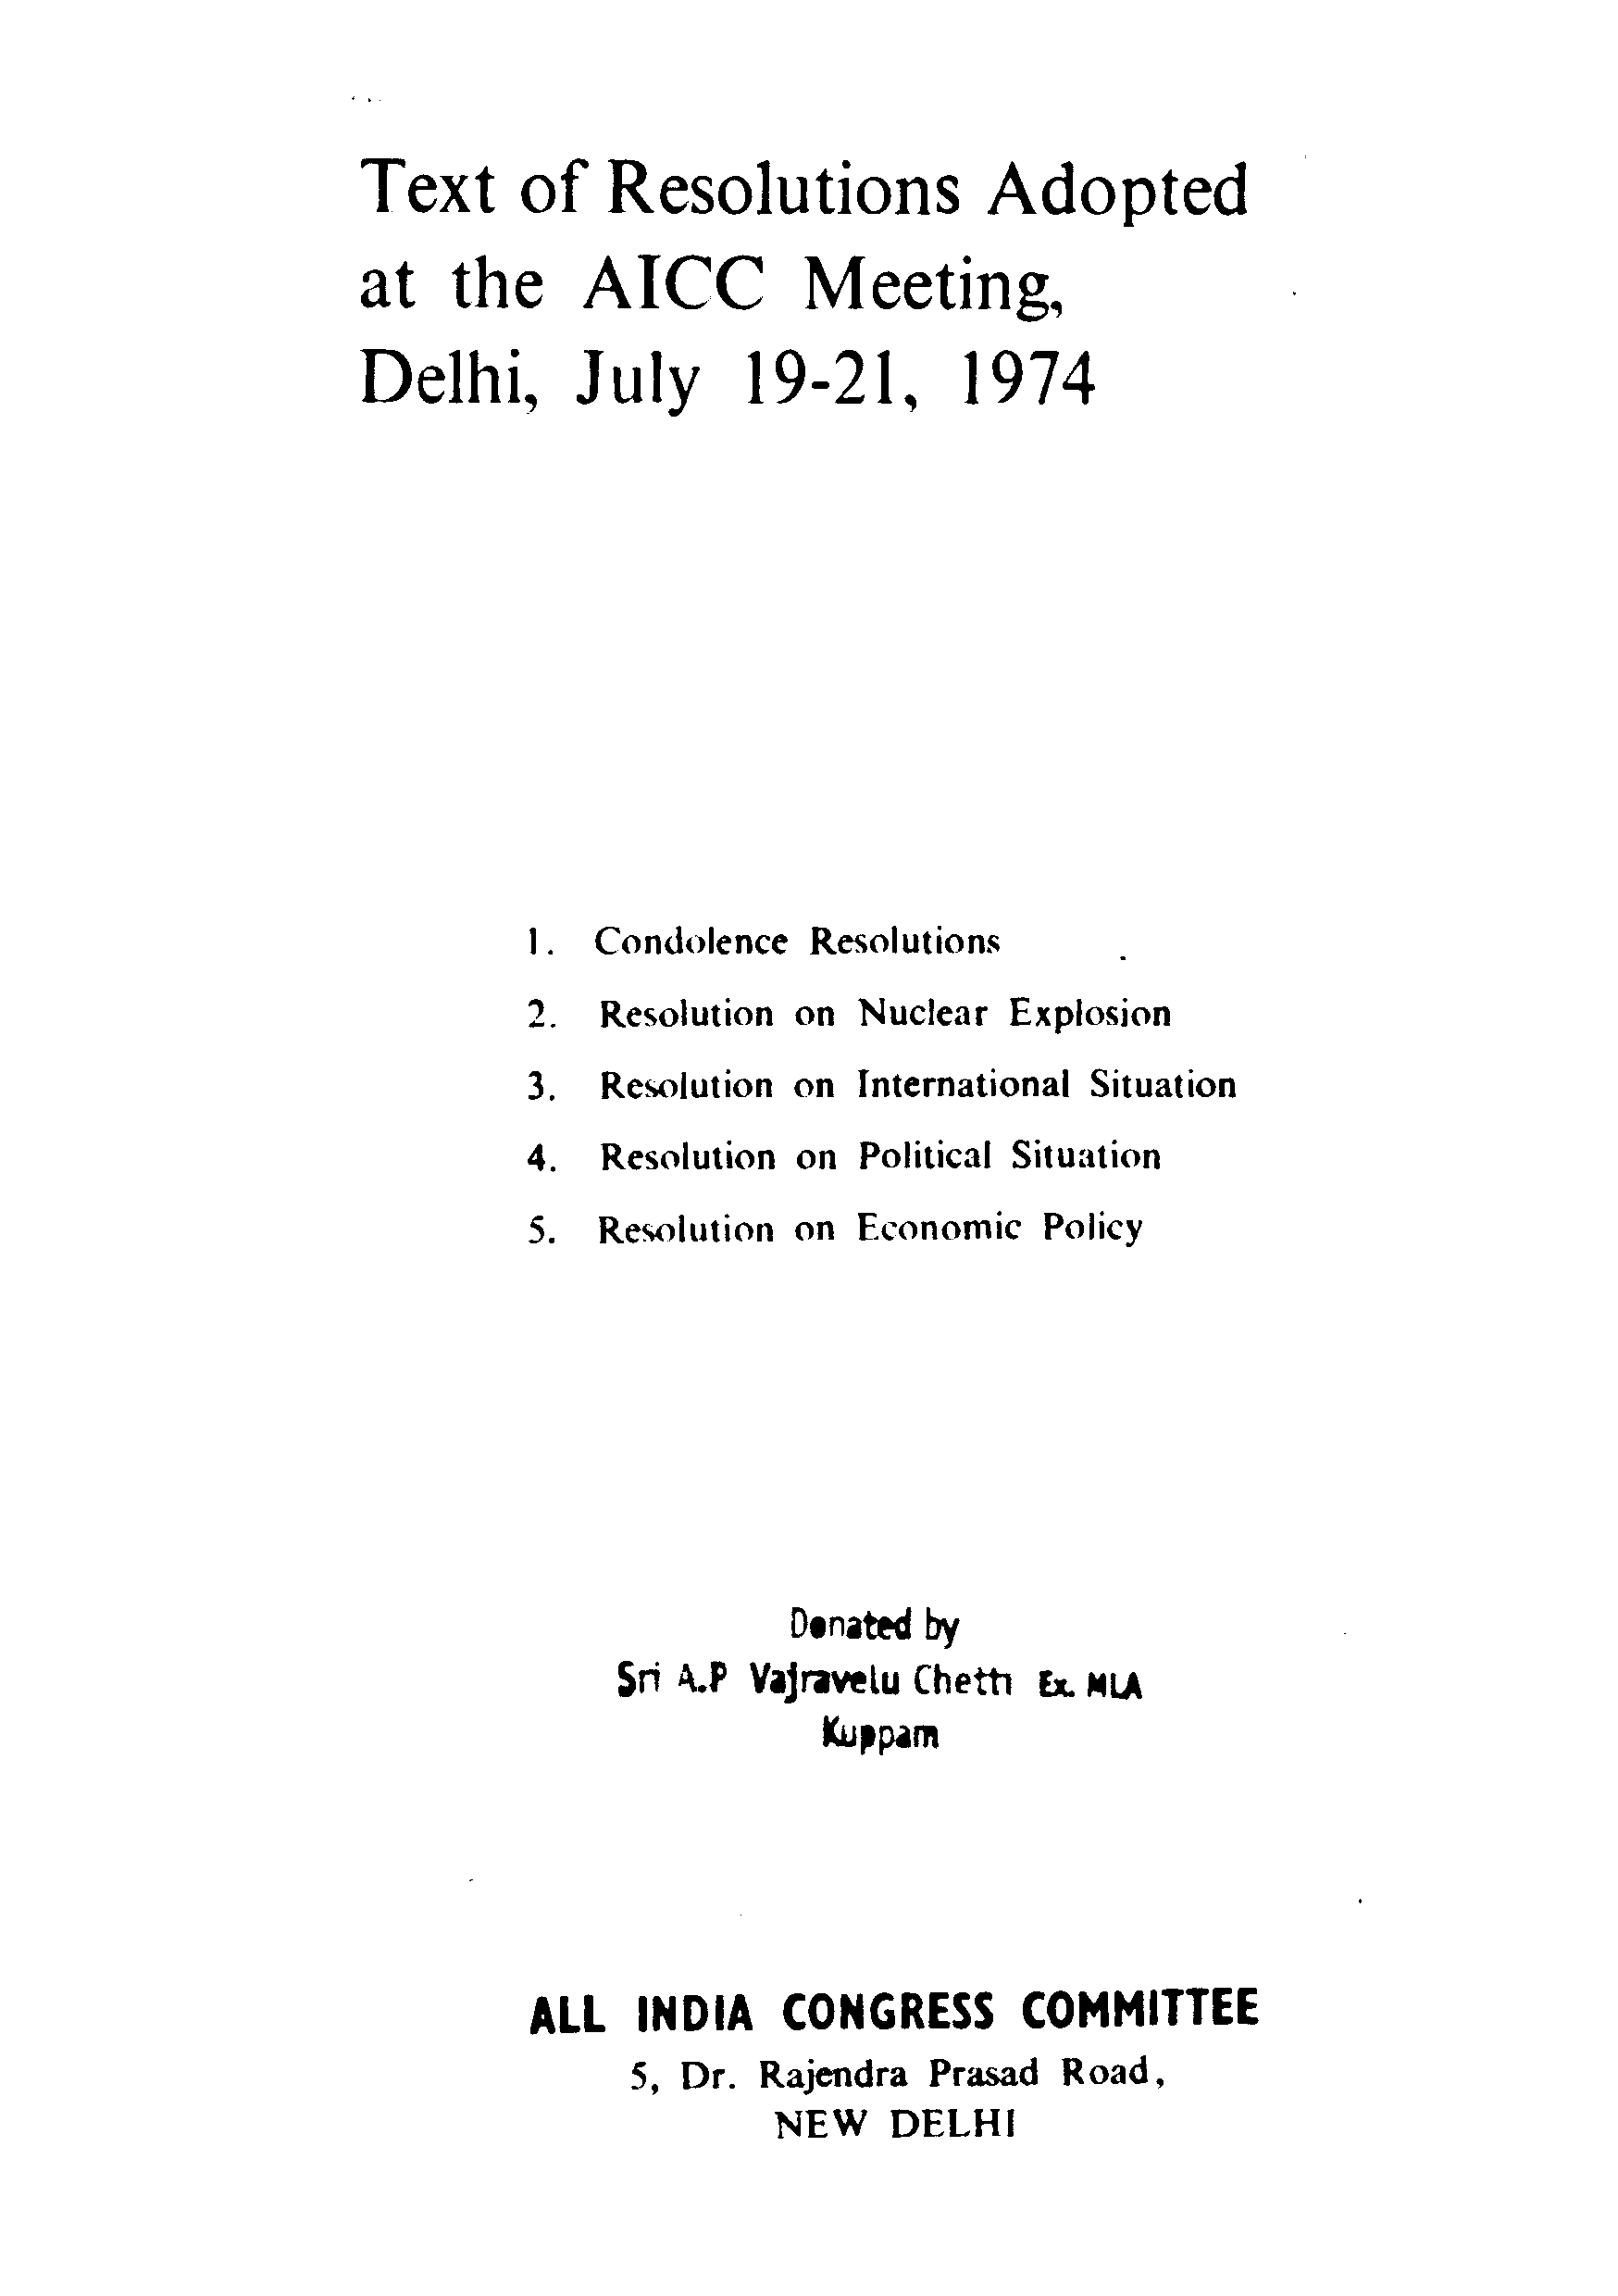 Text of resolutions adpted at the AICC meeting delhi, july 19-21, 1974